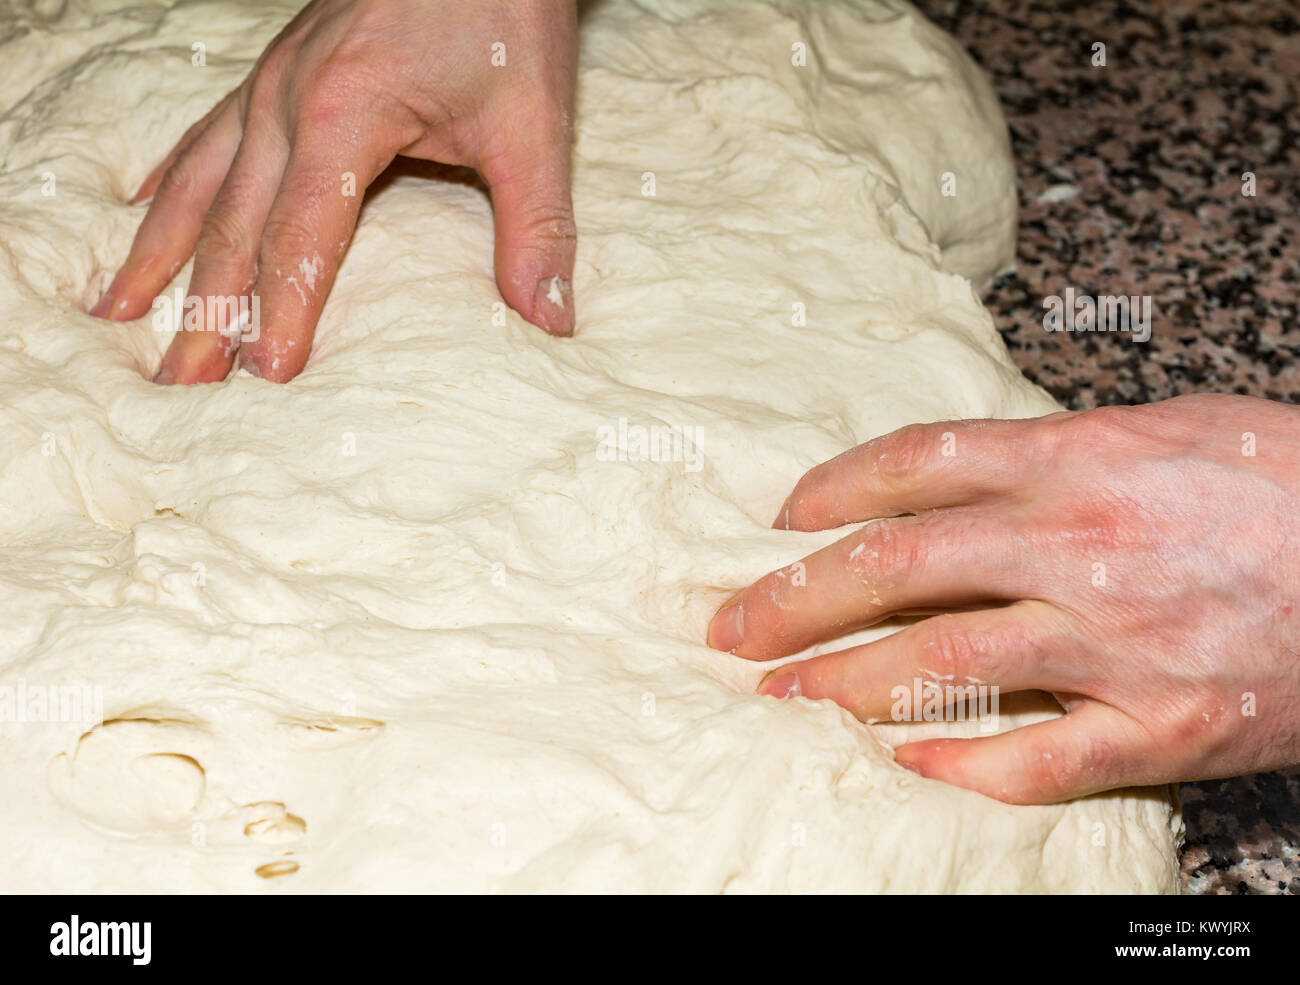 the chef's hands knead the dough to make pizza in the kitchen. Food, italian cuisine and cooking concept. Preparation of the Italian Pizza Stock Photo